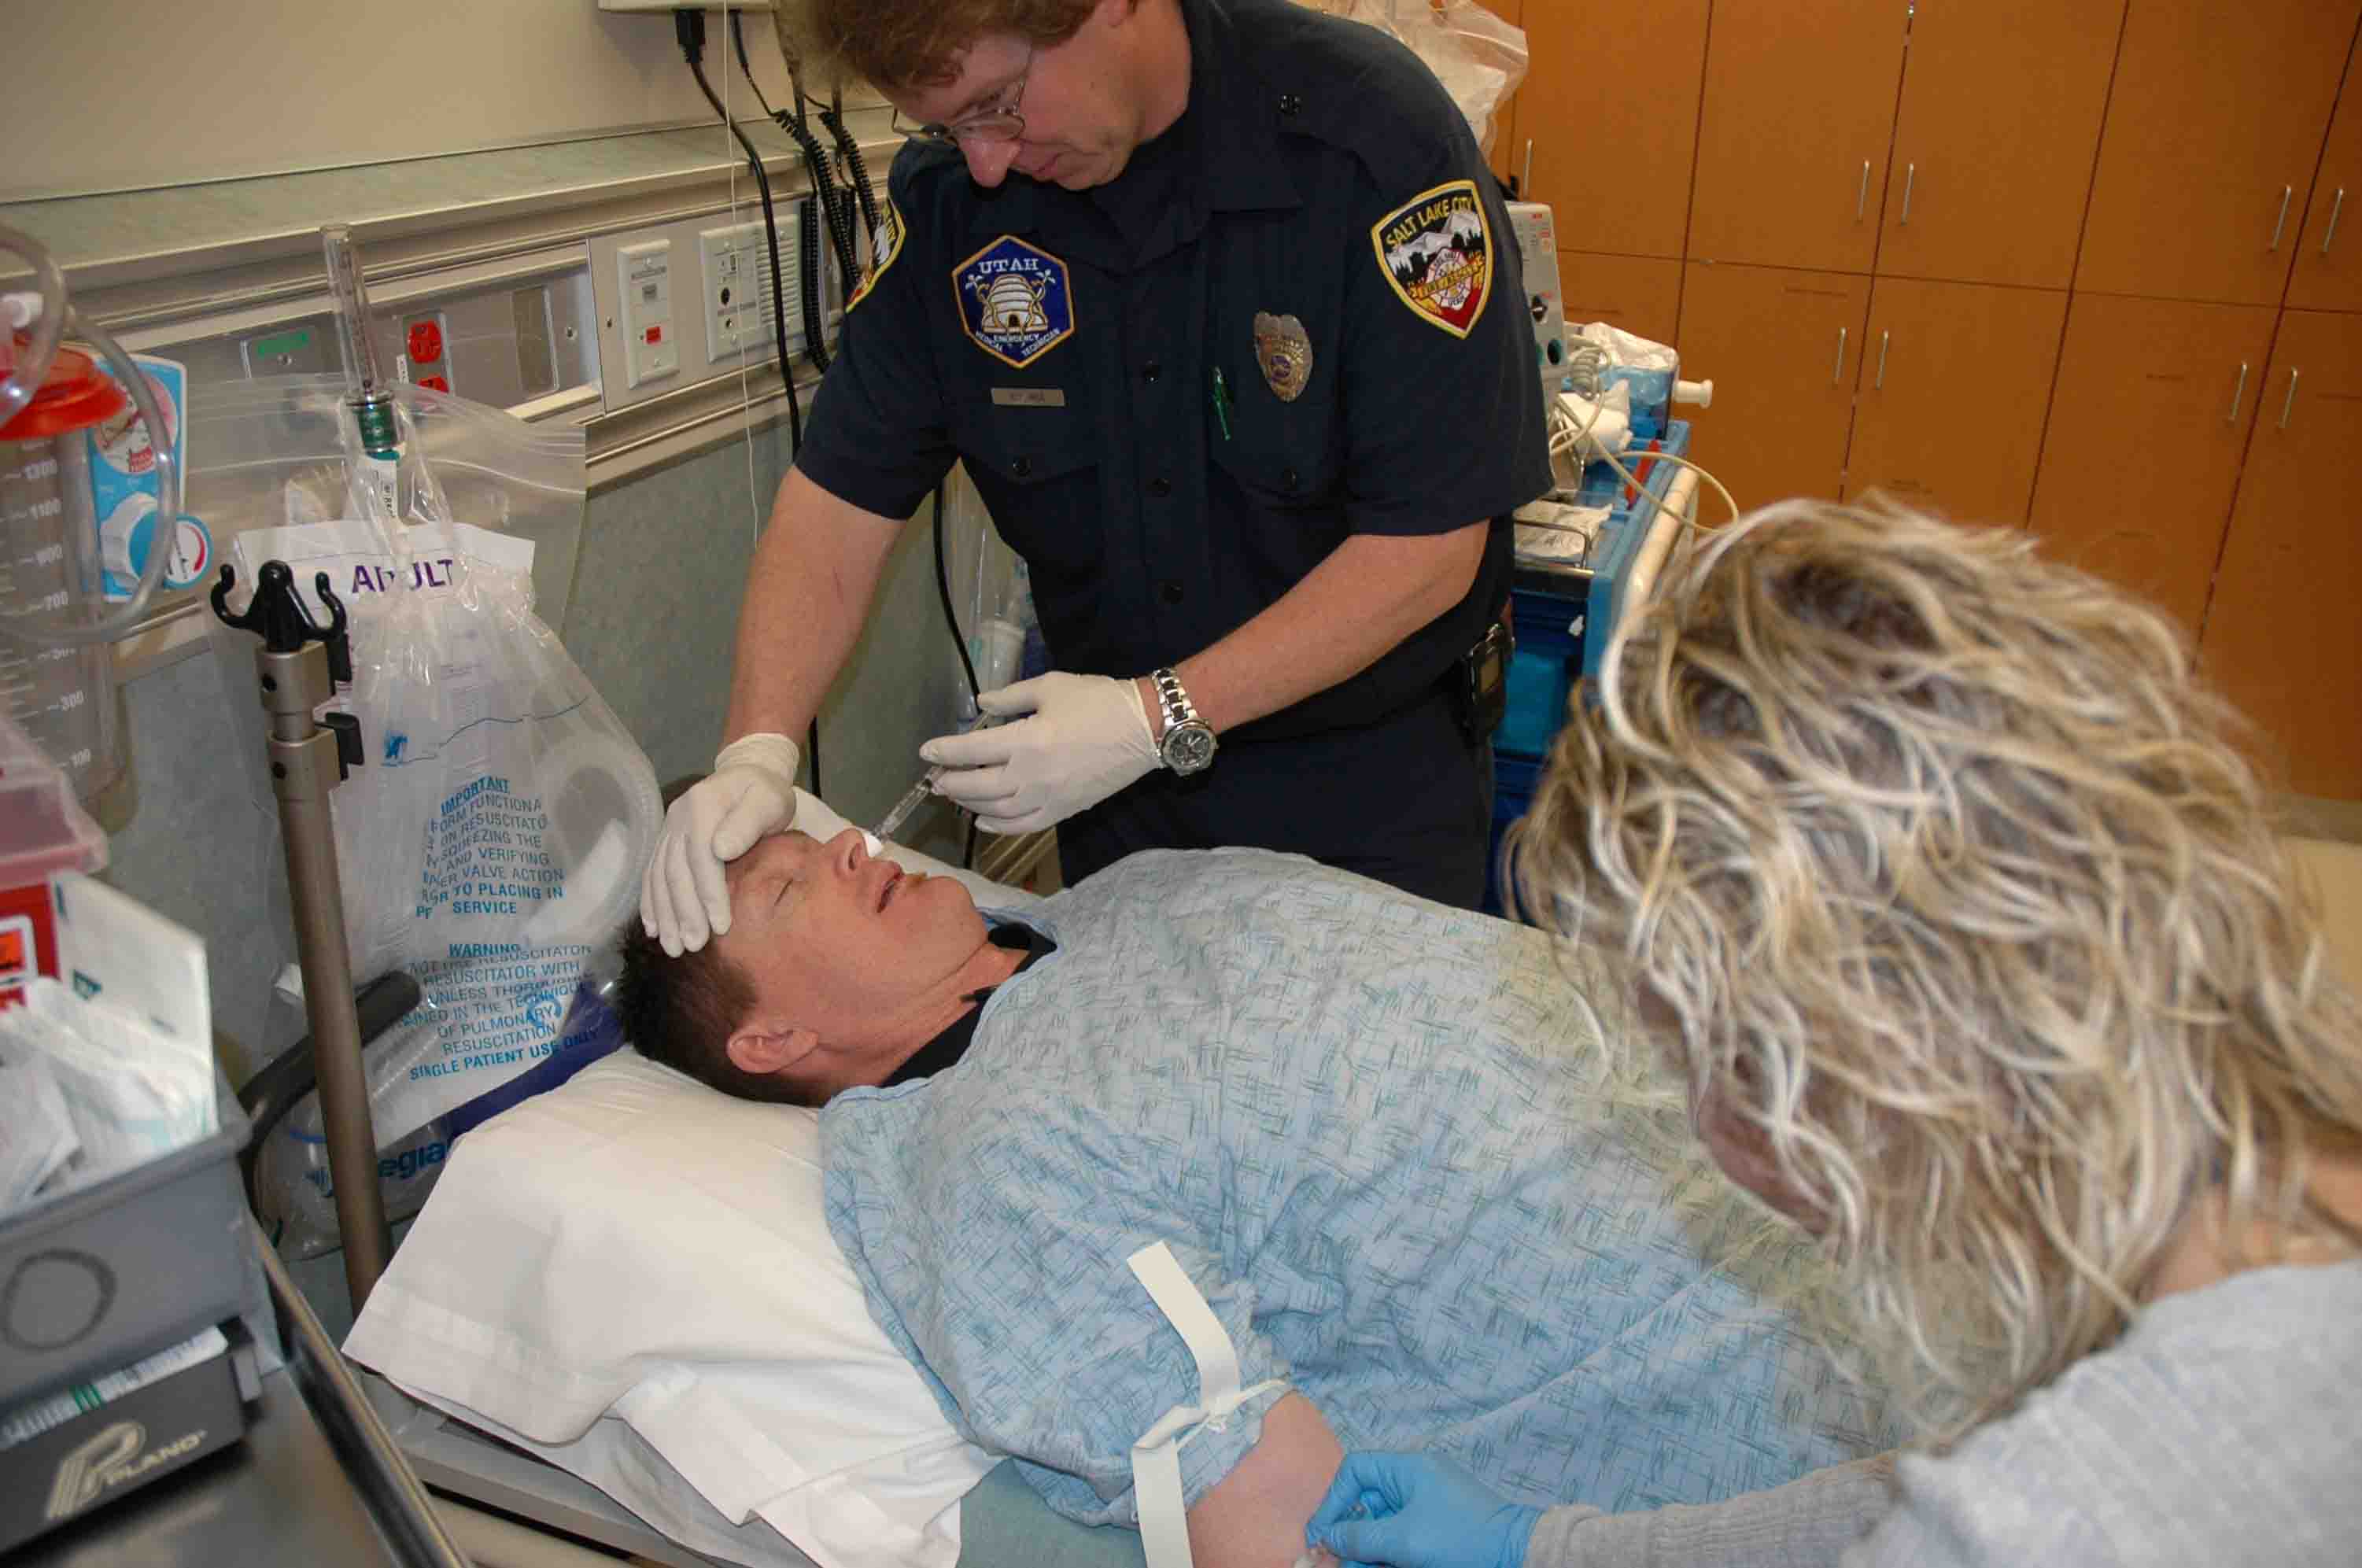 Delivering intranasal naloxone to a heroin overdose in an emergency situation